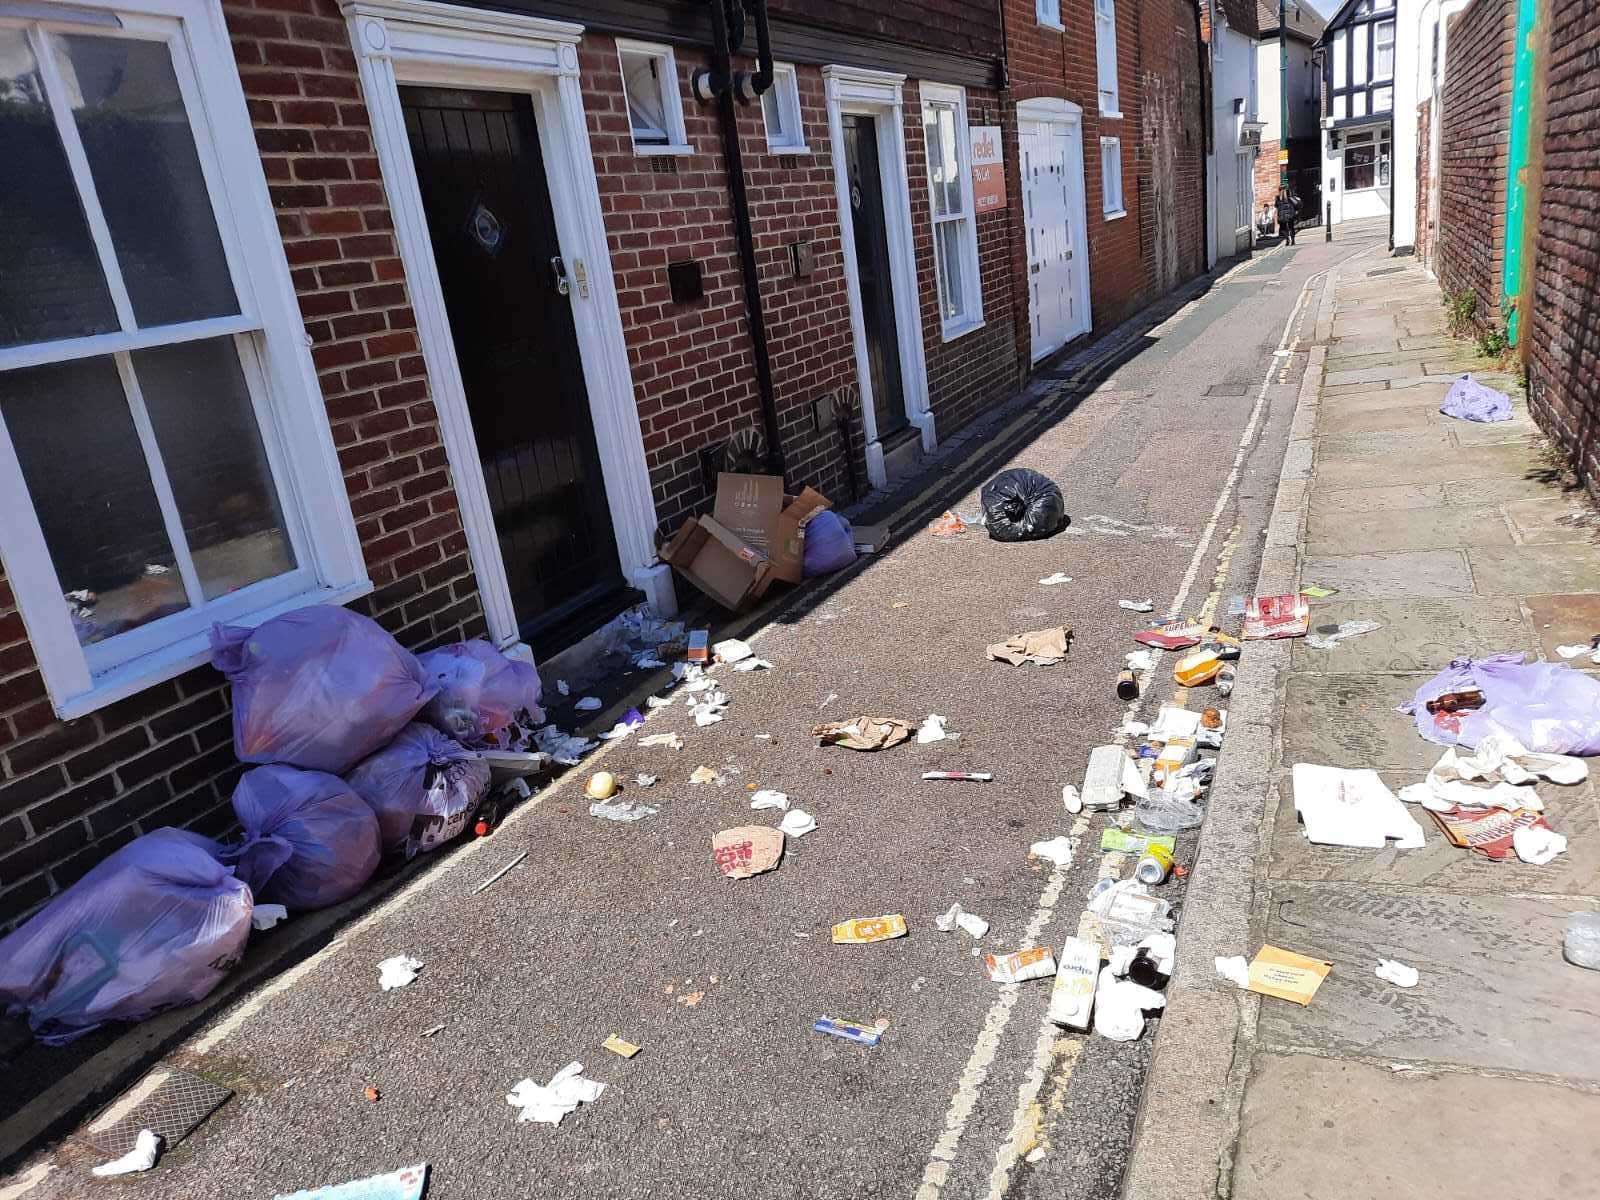 The rubbish left behind by students in High Street St Gregory's. Picture: Pat Gorman